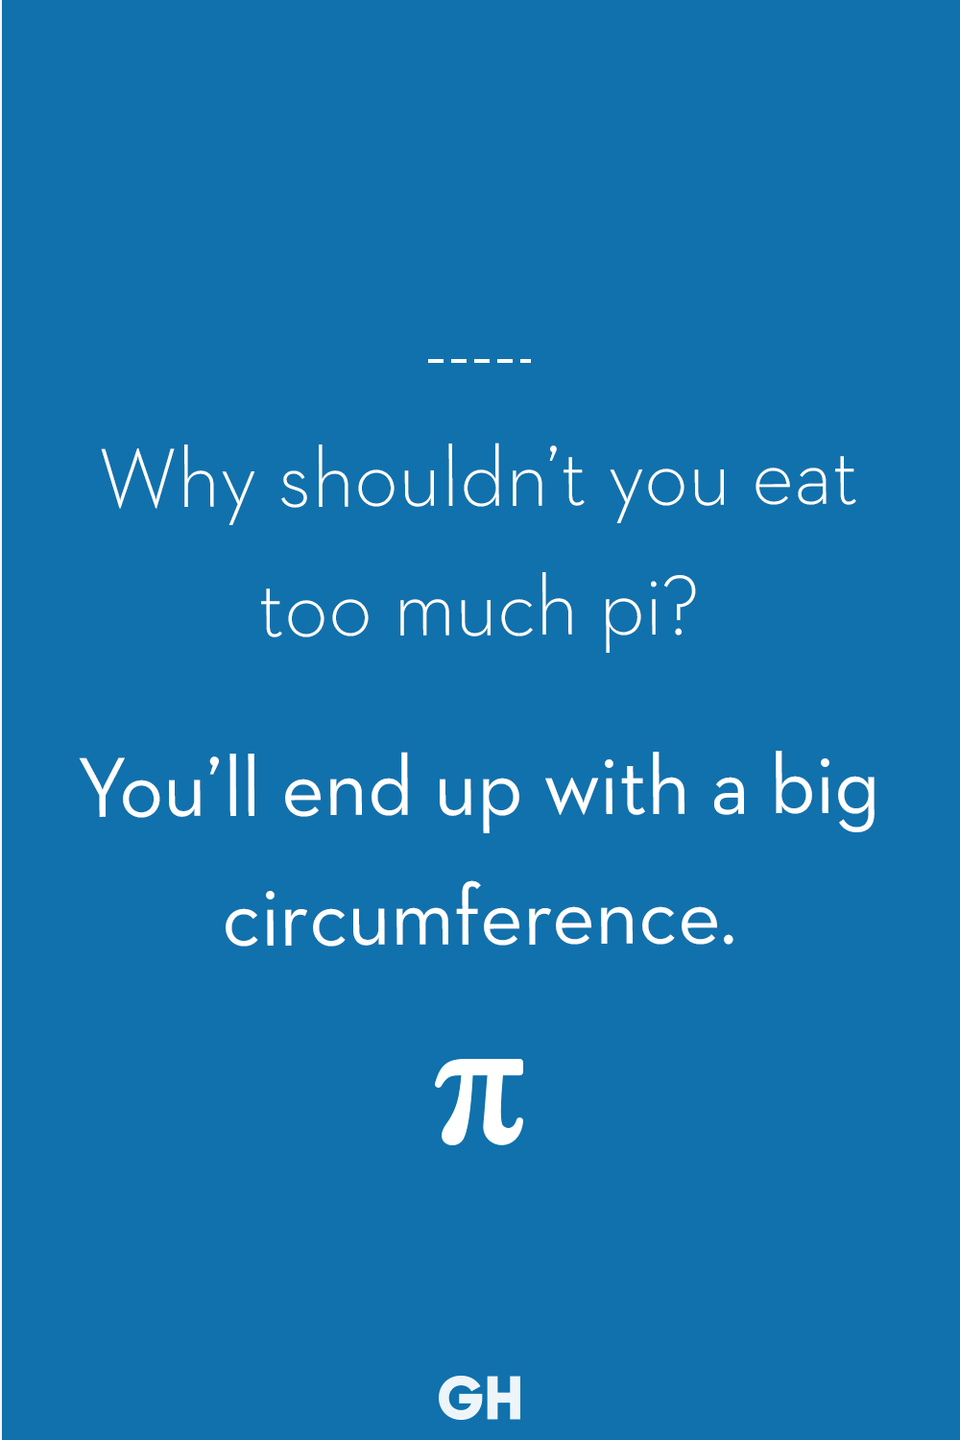 <p>You’ll end up with a big circumference.</p>